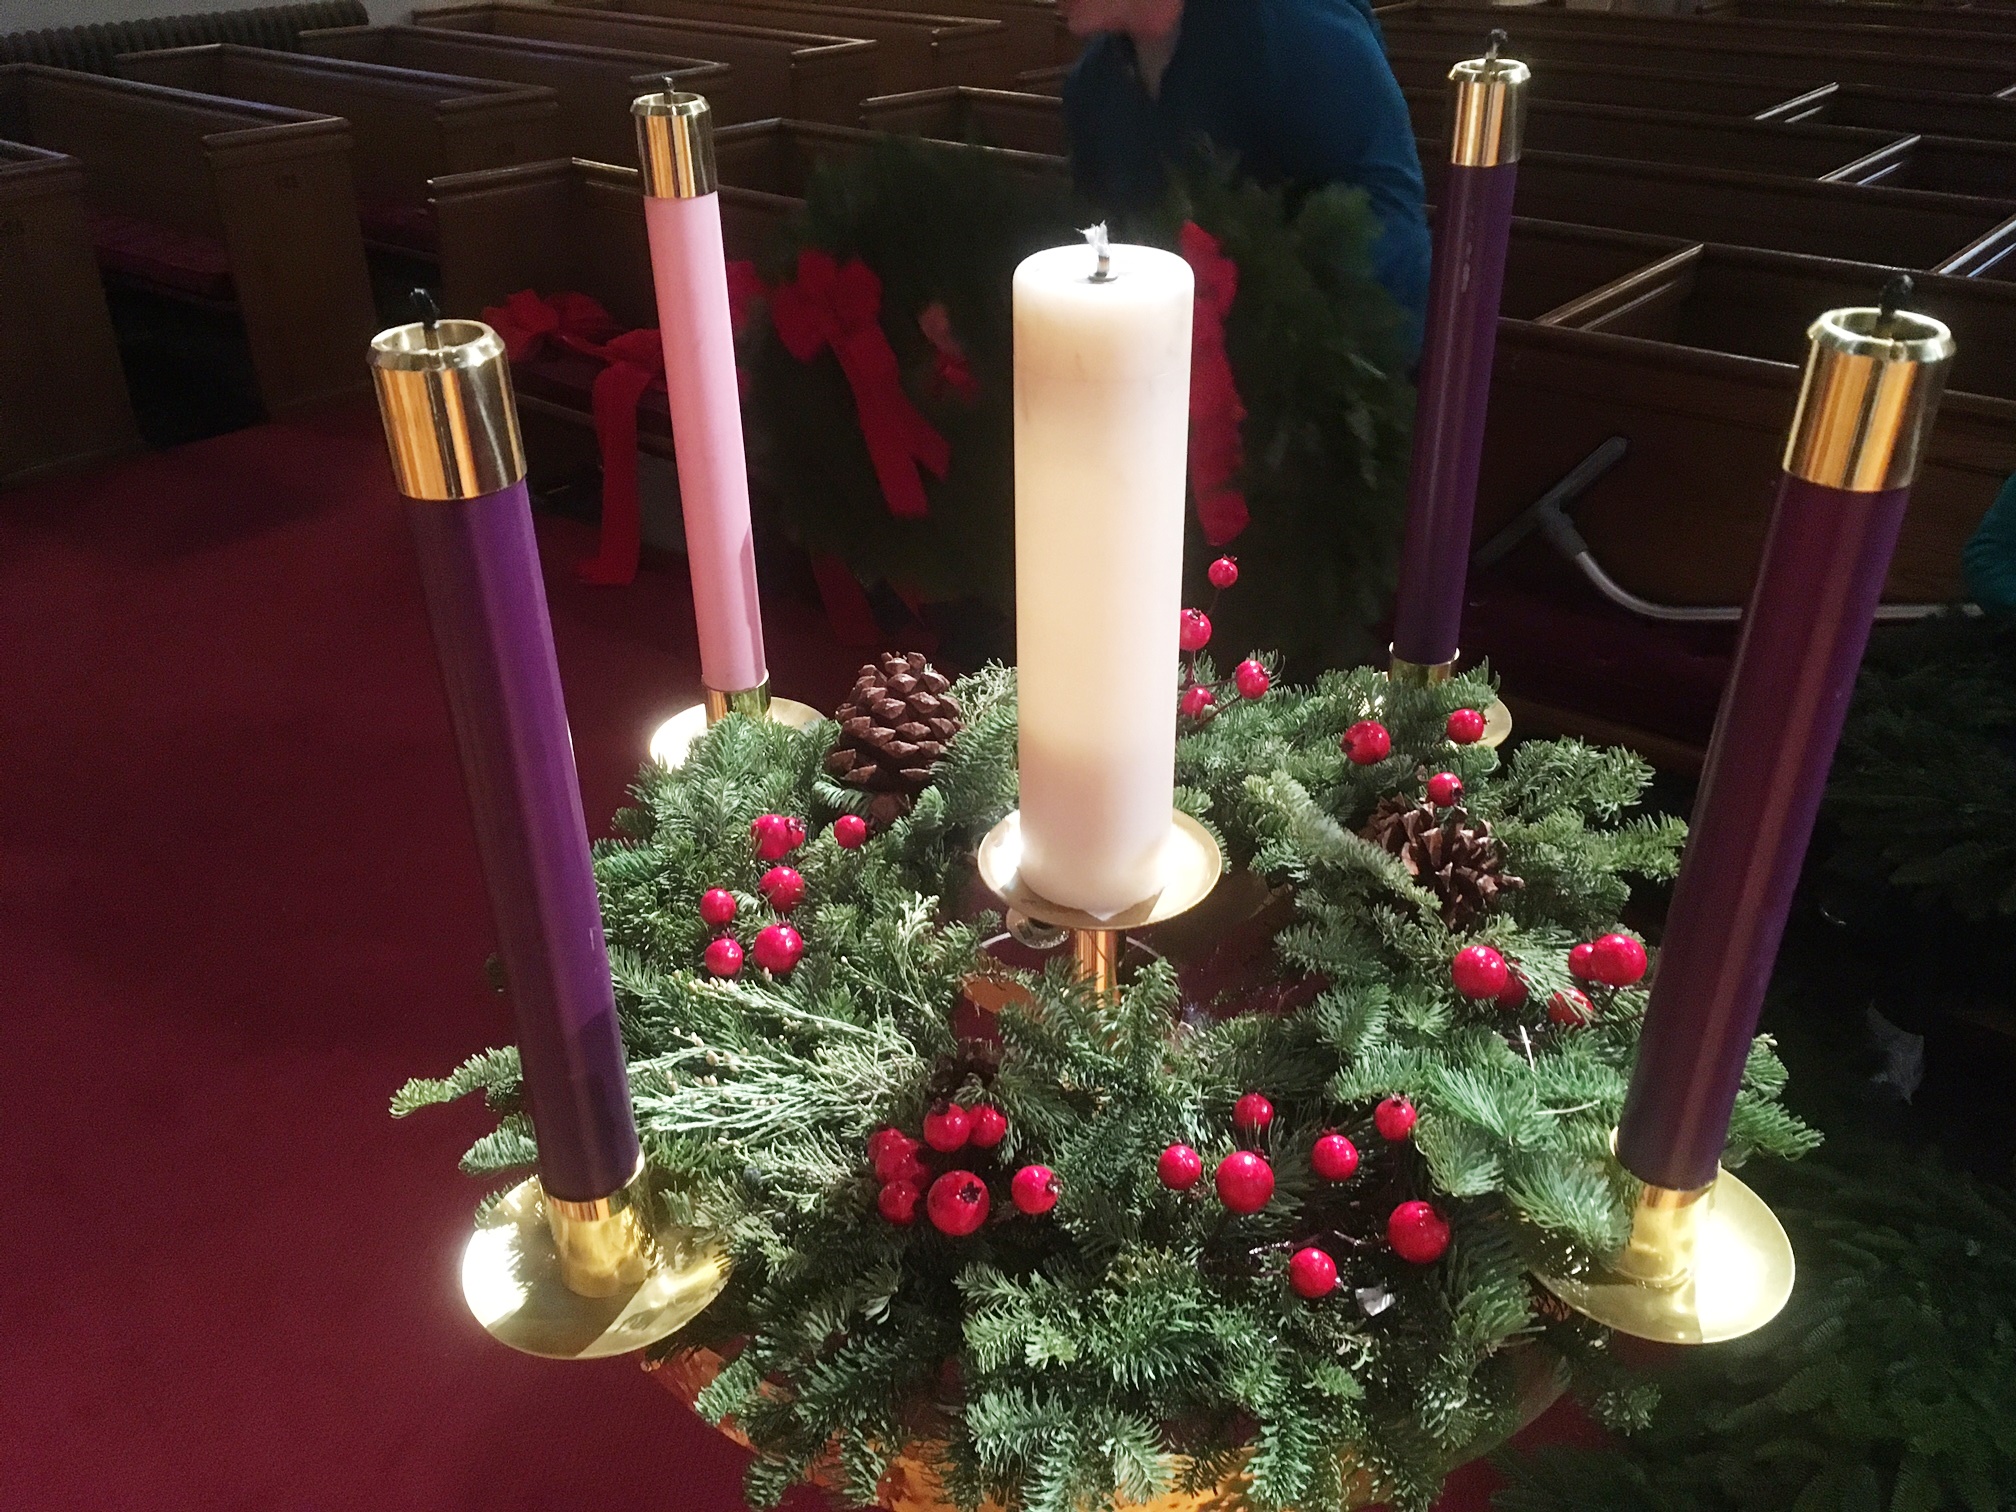 WEEKLY COMMENTARY: How Does Our Celebration of ADVENT Prepare Us For ...